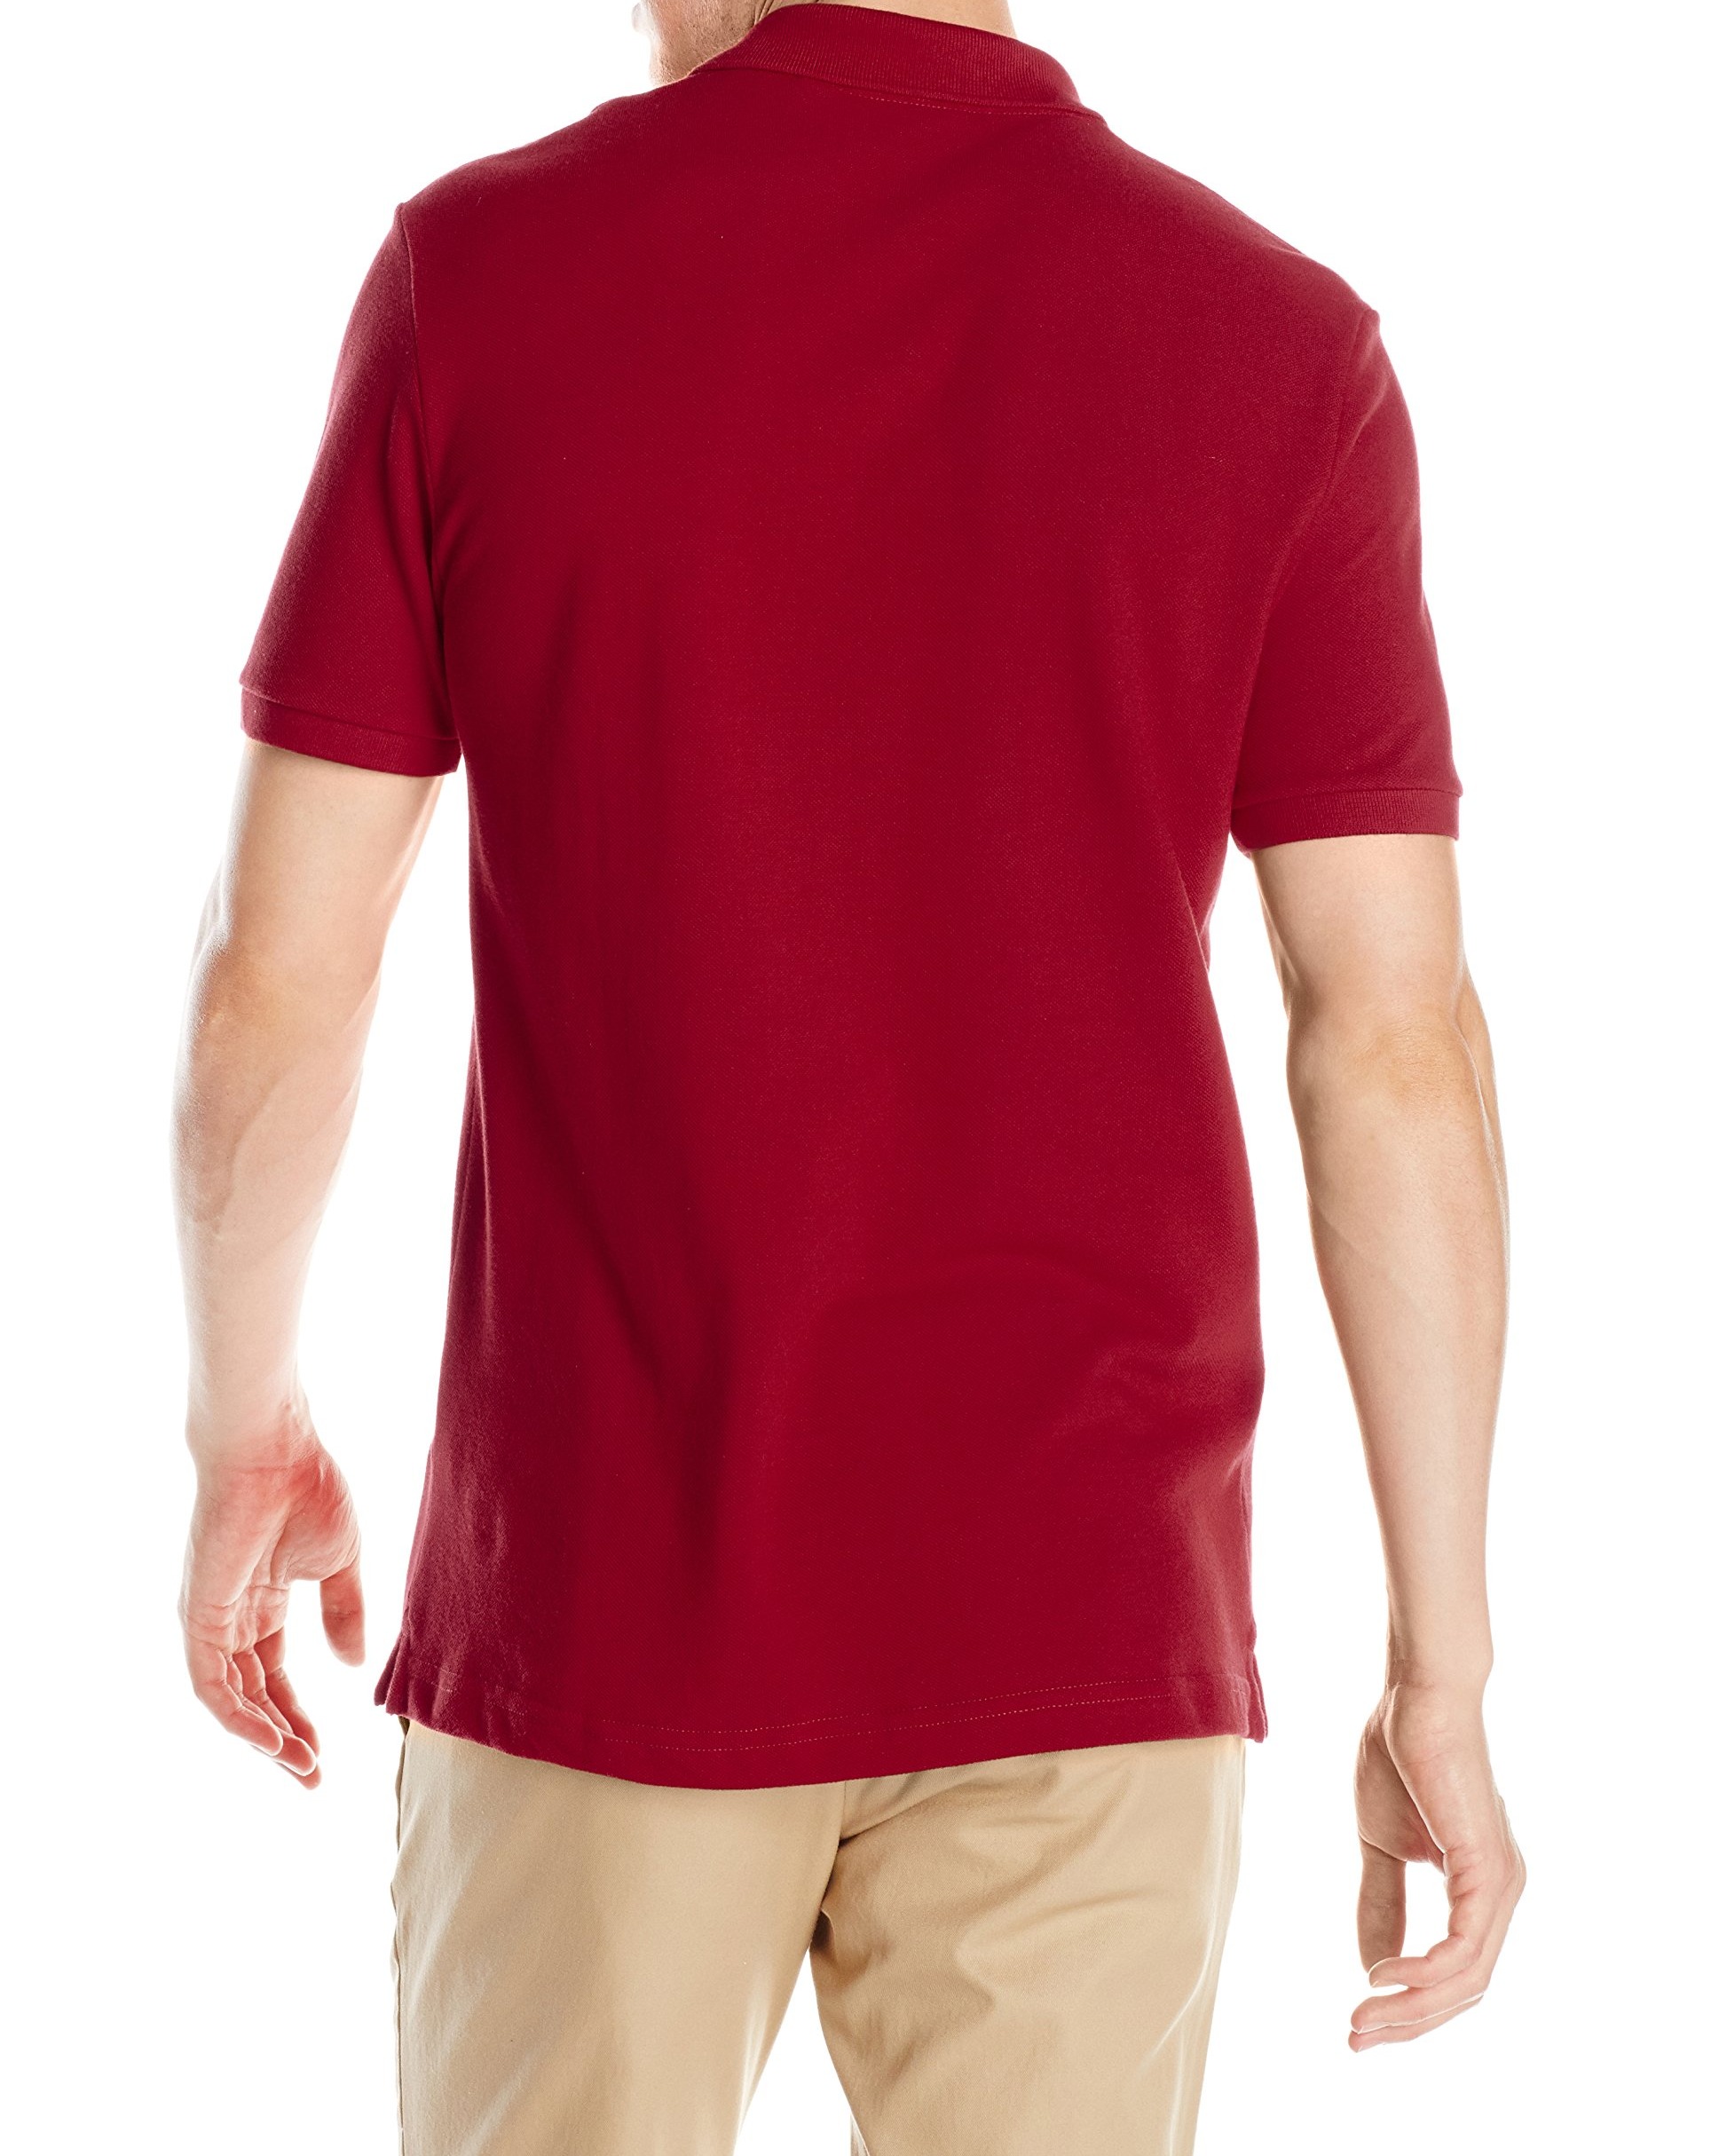 Lacoste Men Classic Pique Slim Fit Short Sleeve Polo - image 2 of 3